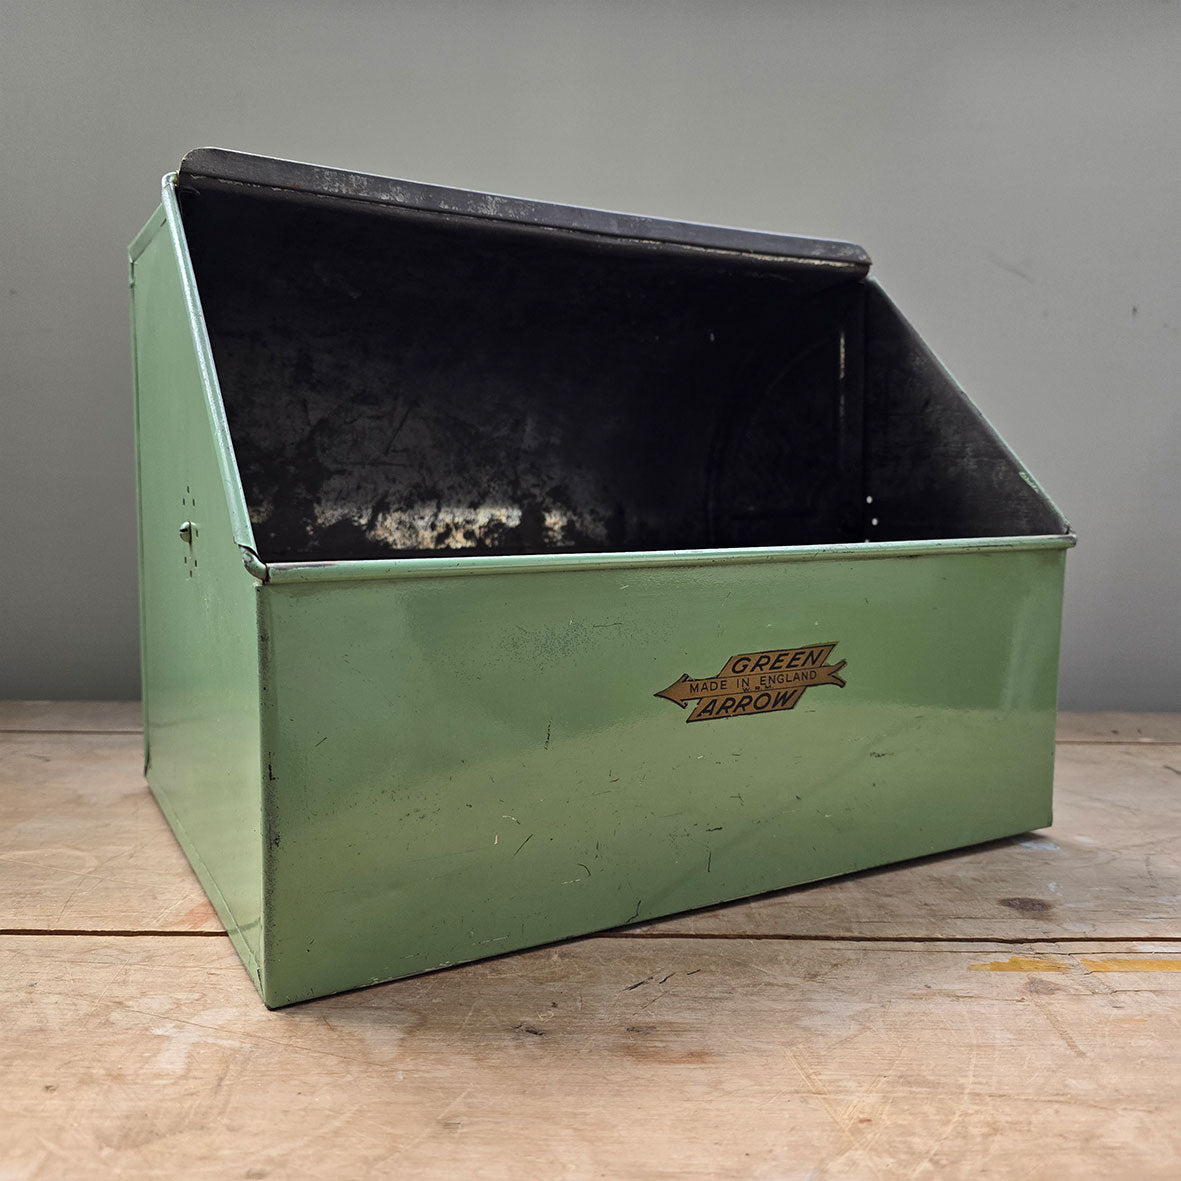 A Vintage Green Arrow bread bin in a fab duck egg green and cream combo, and still having its 'BREAD' and 'Green Arrow' water slide stickers to the front. A great looking item for the vintage kitchen - SHOP NOW - www.intovintage.co.uk